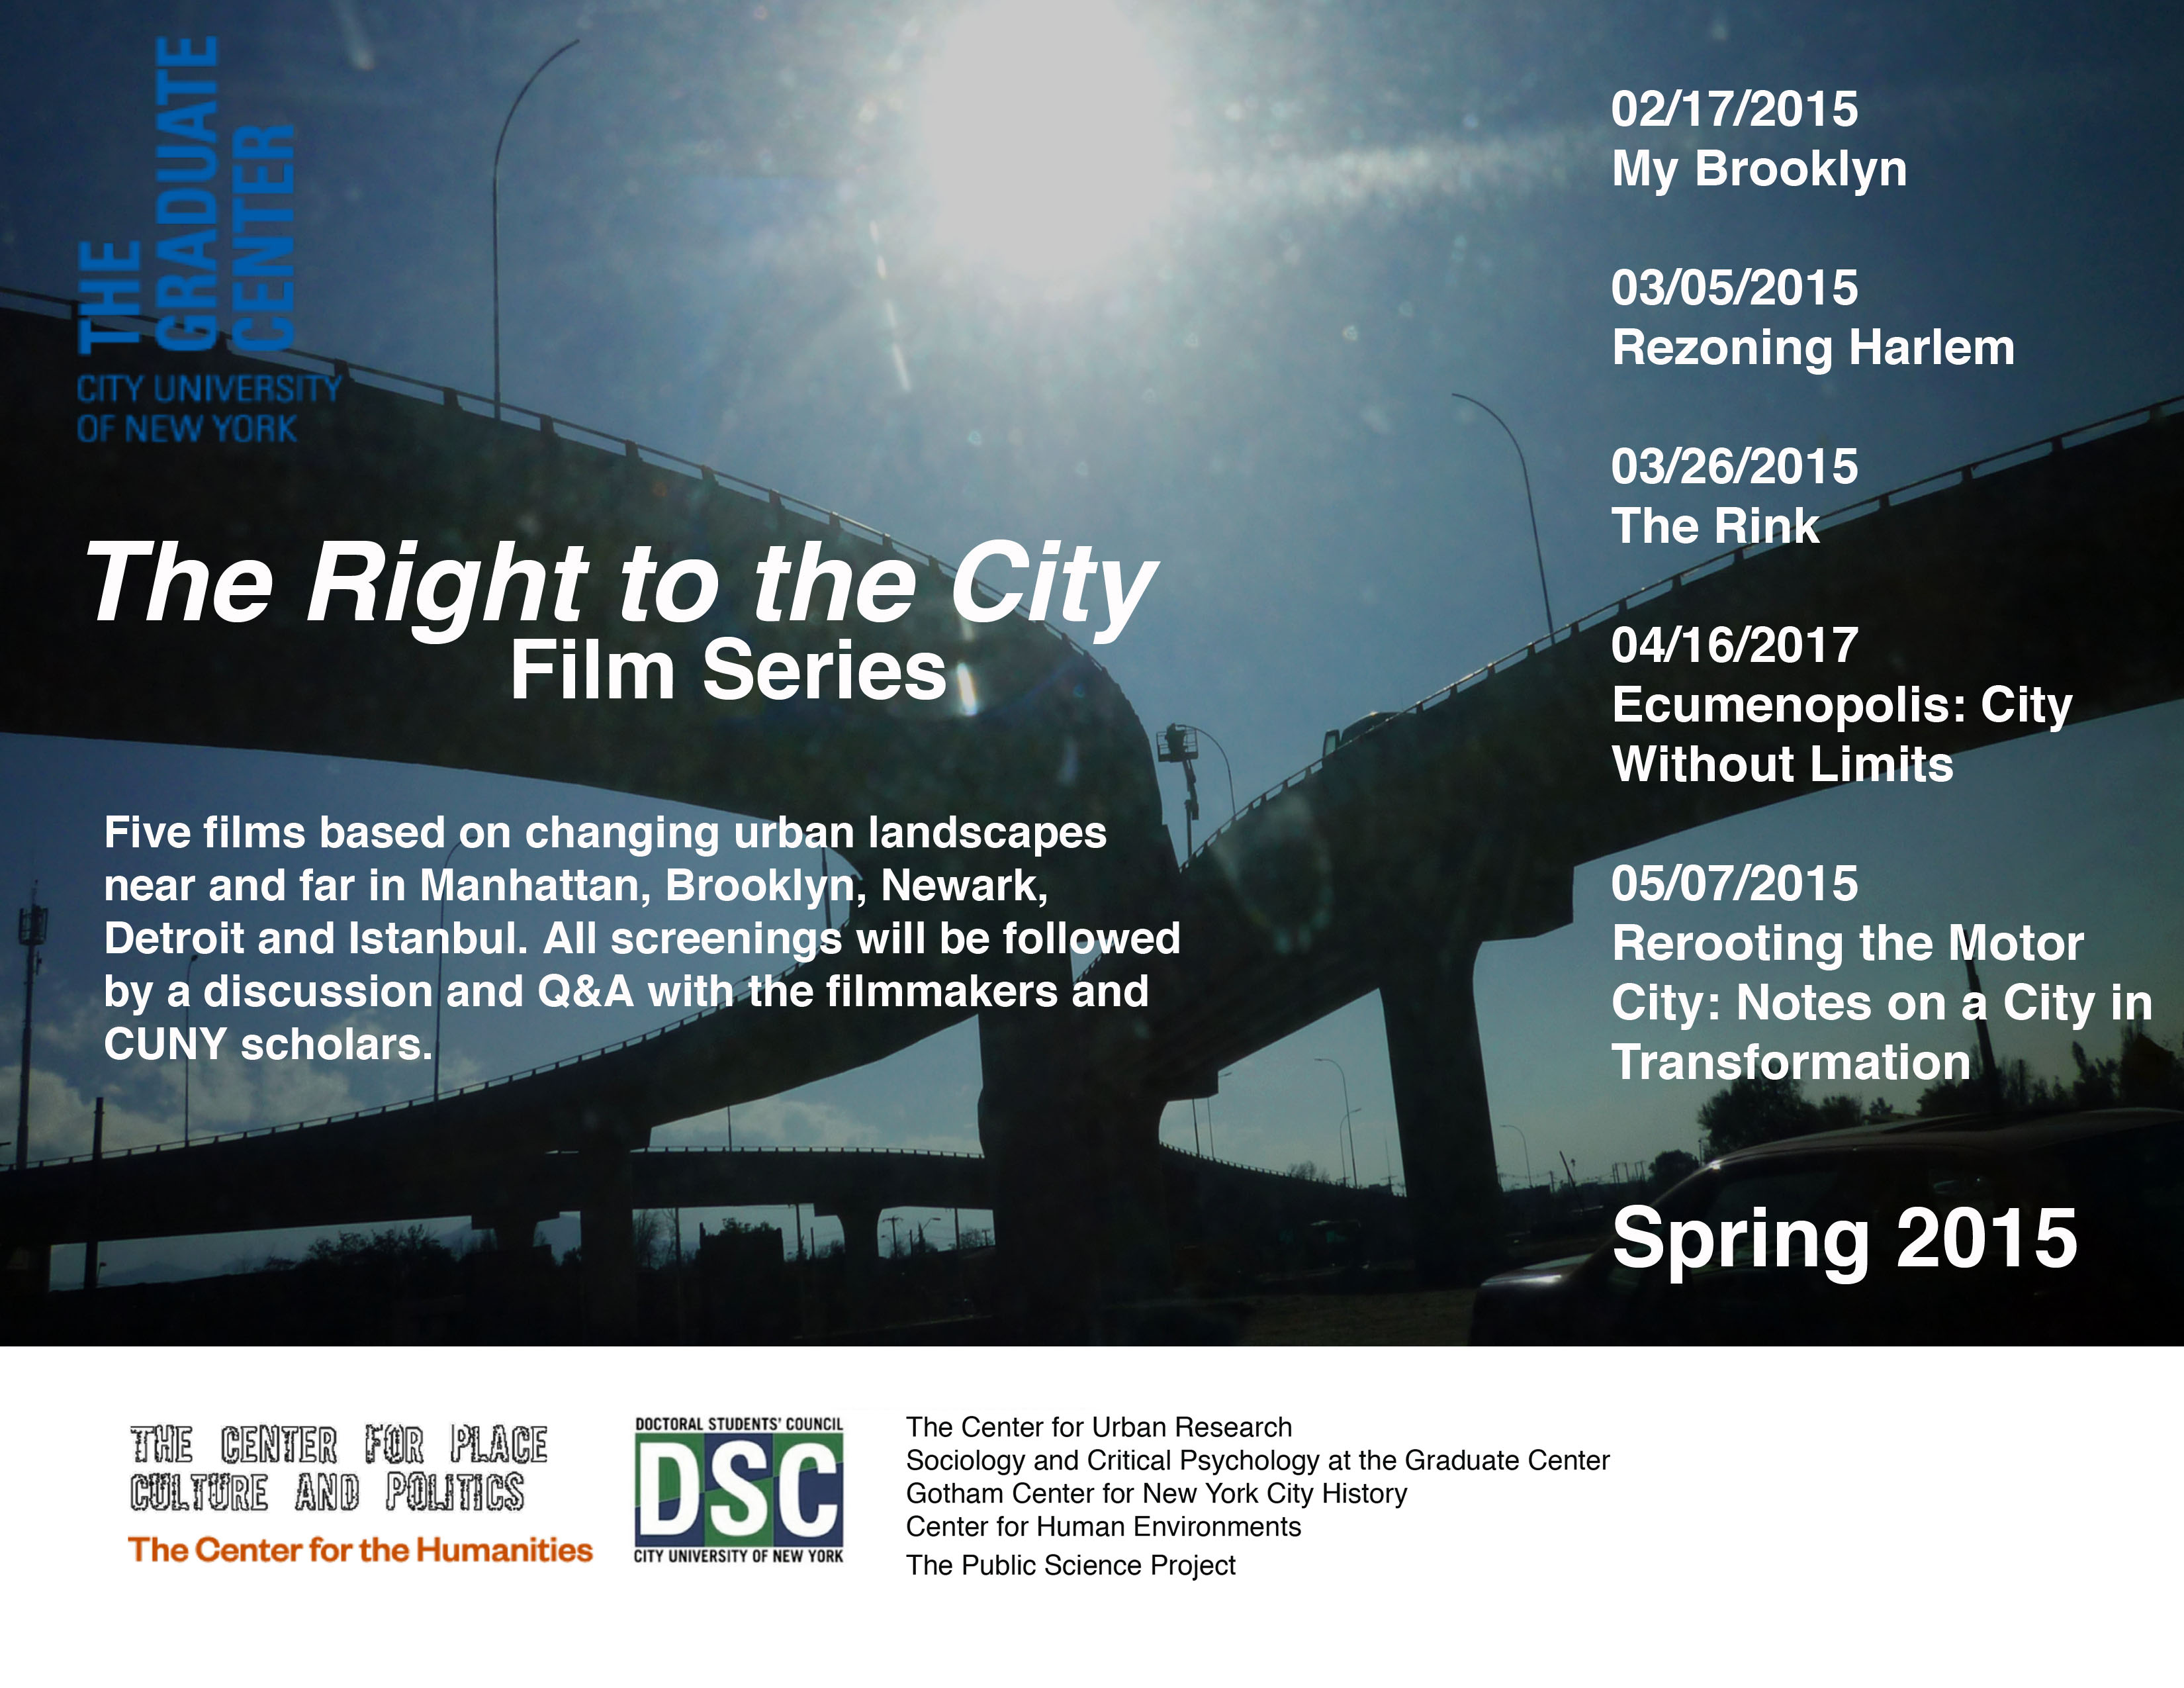 The Right to the City Film Series